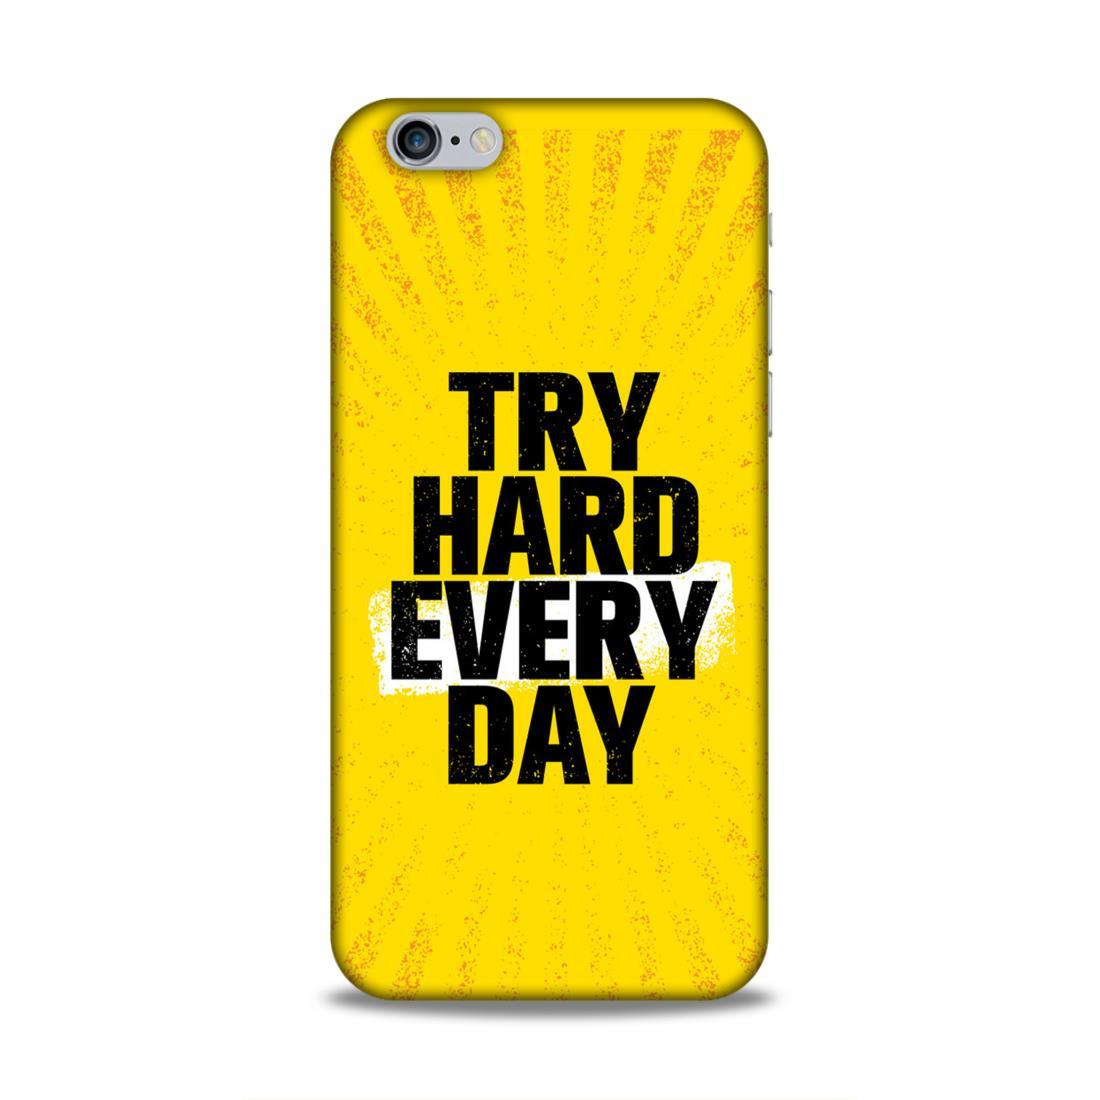 Try Hard Every Day iPhone 6 Mobile Case Cover